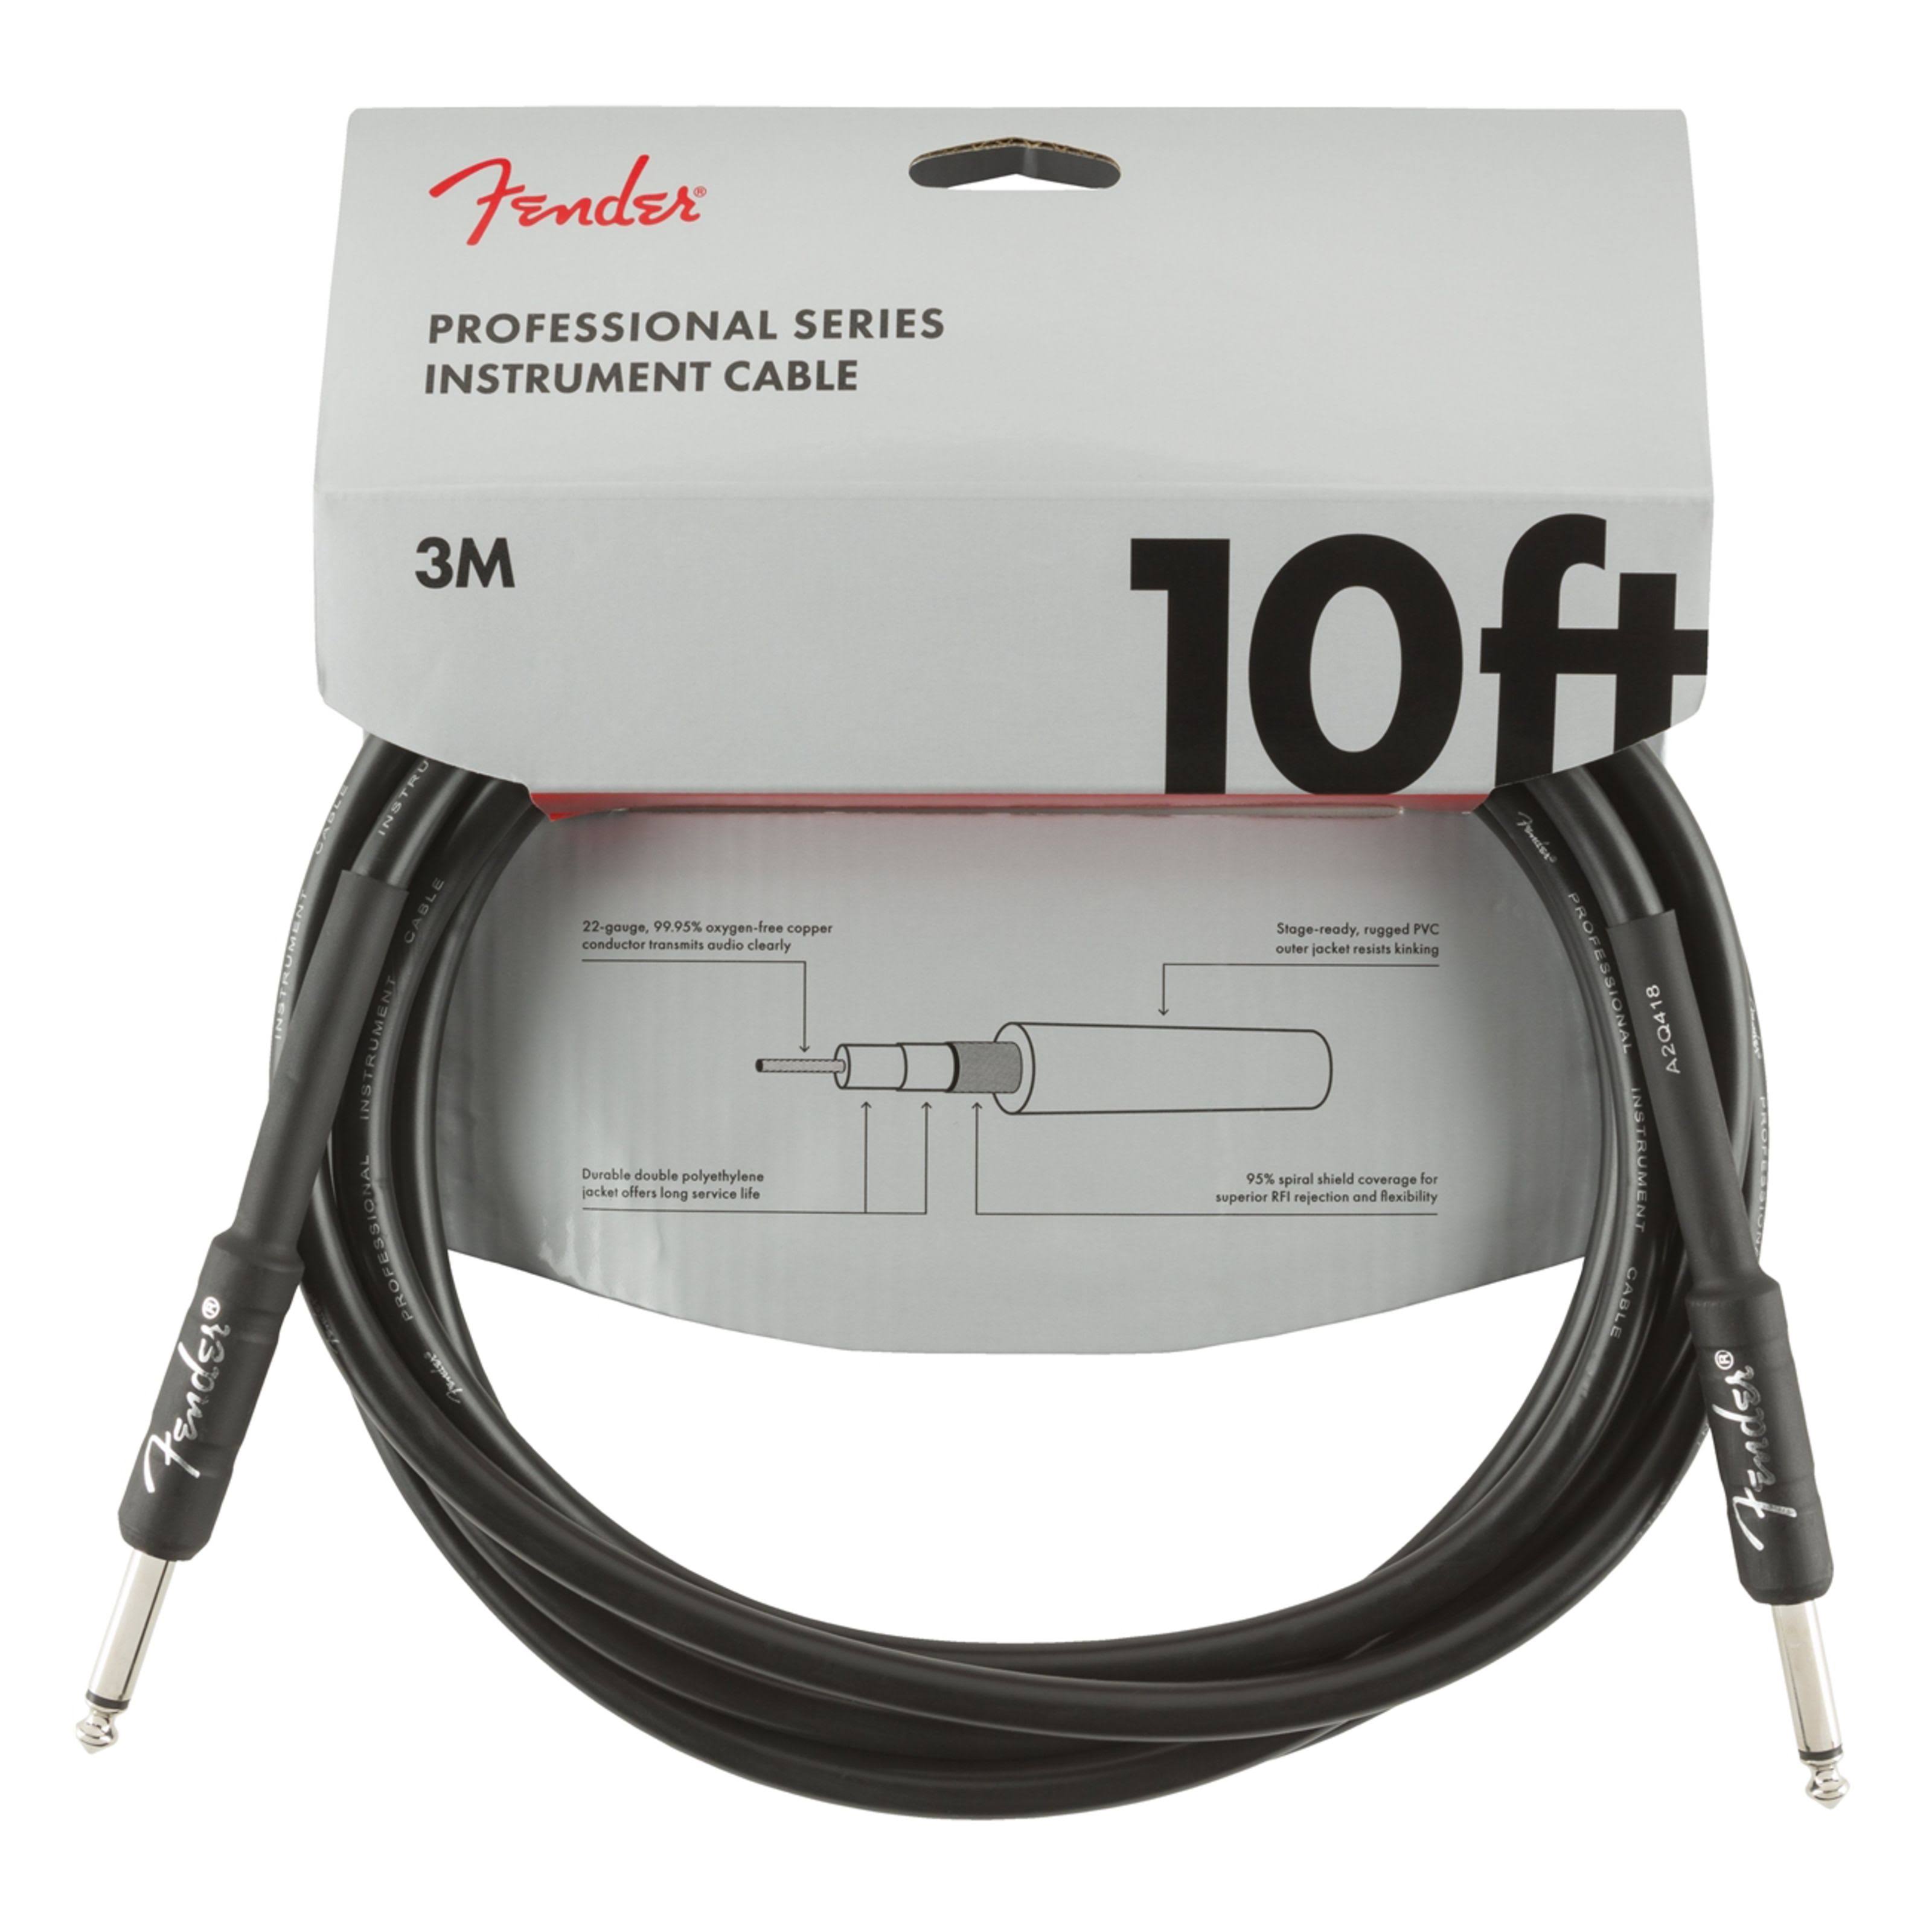 Fender Professional Series 10ft Instrument Cable Black